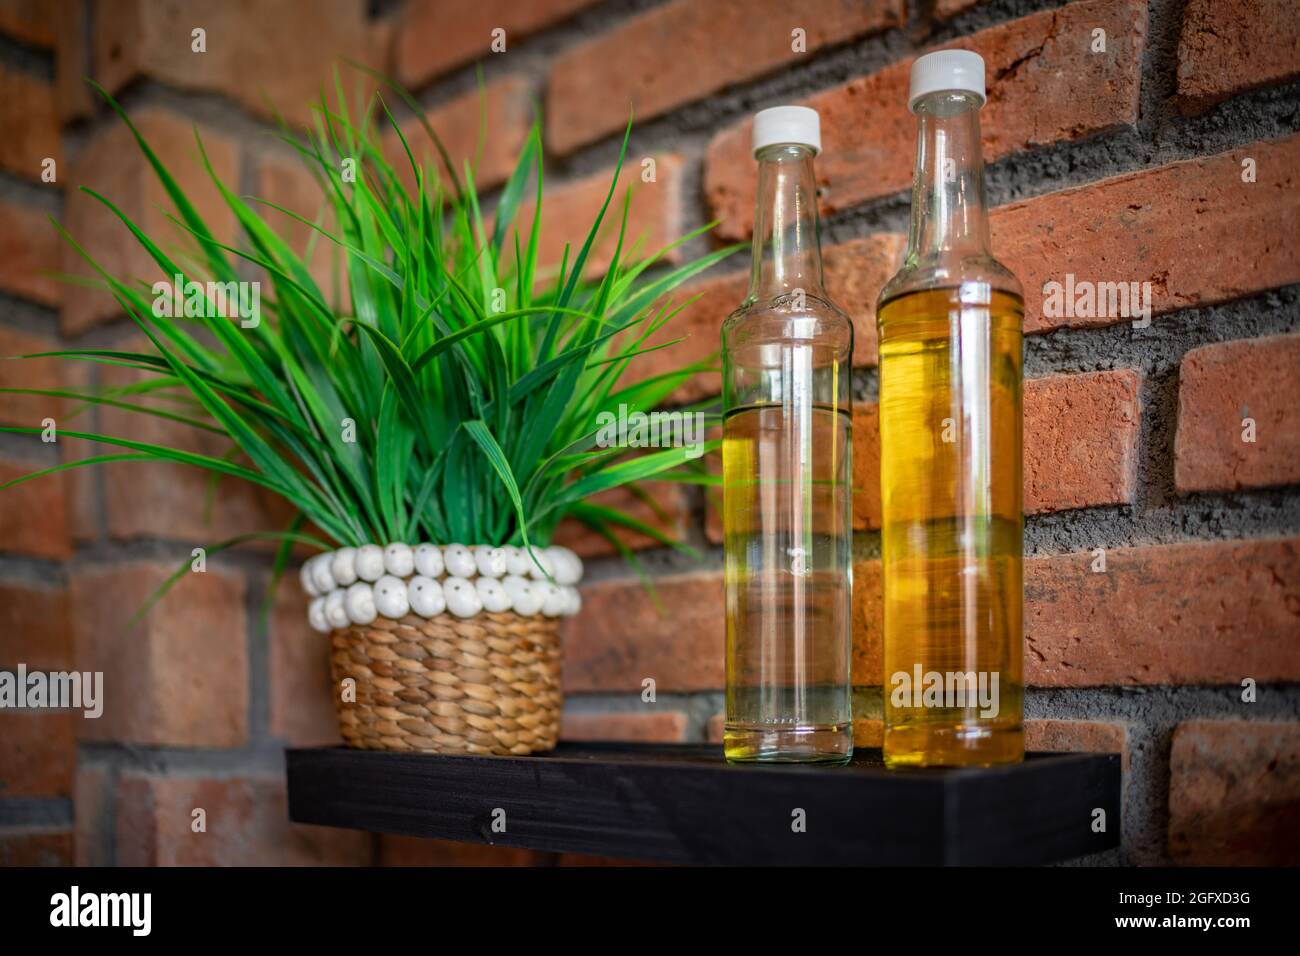 details kitchen interior. Bottles with oil, flowers, paintings on the wall. Stock Photo